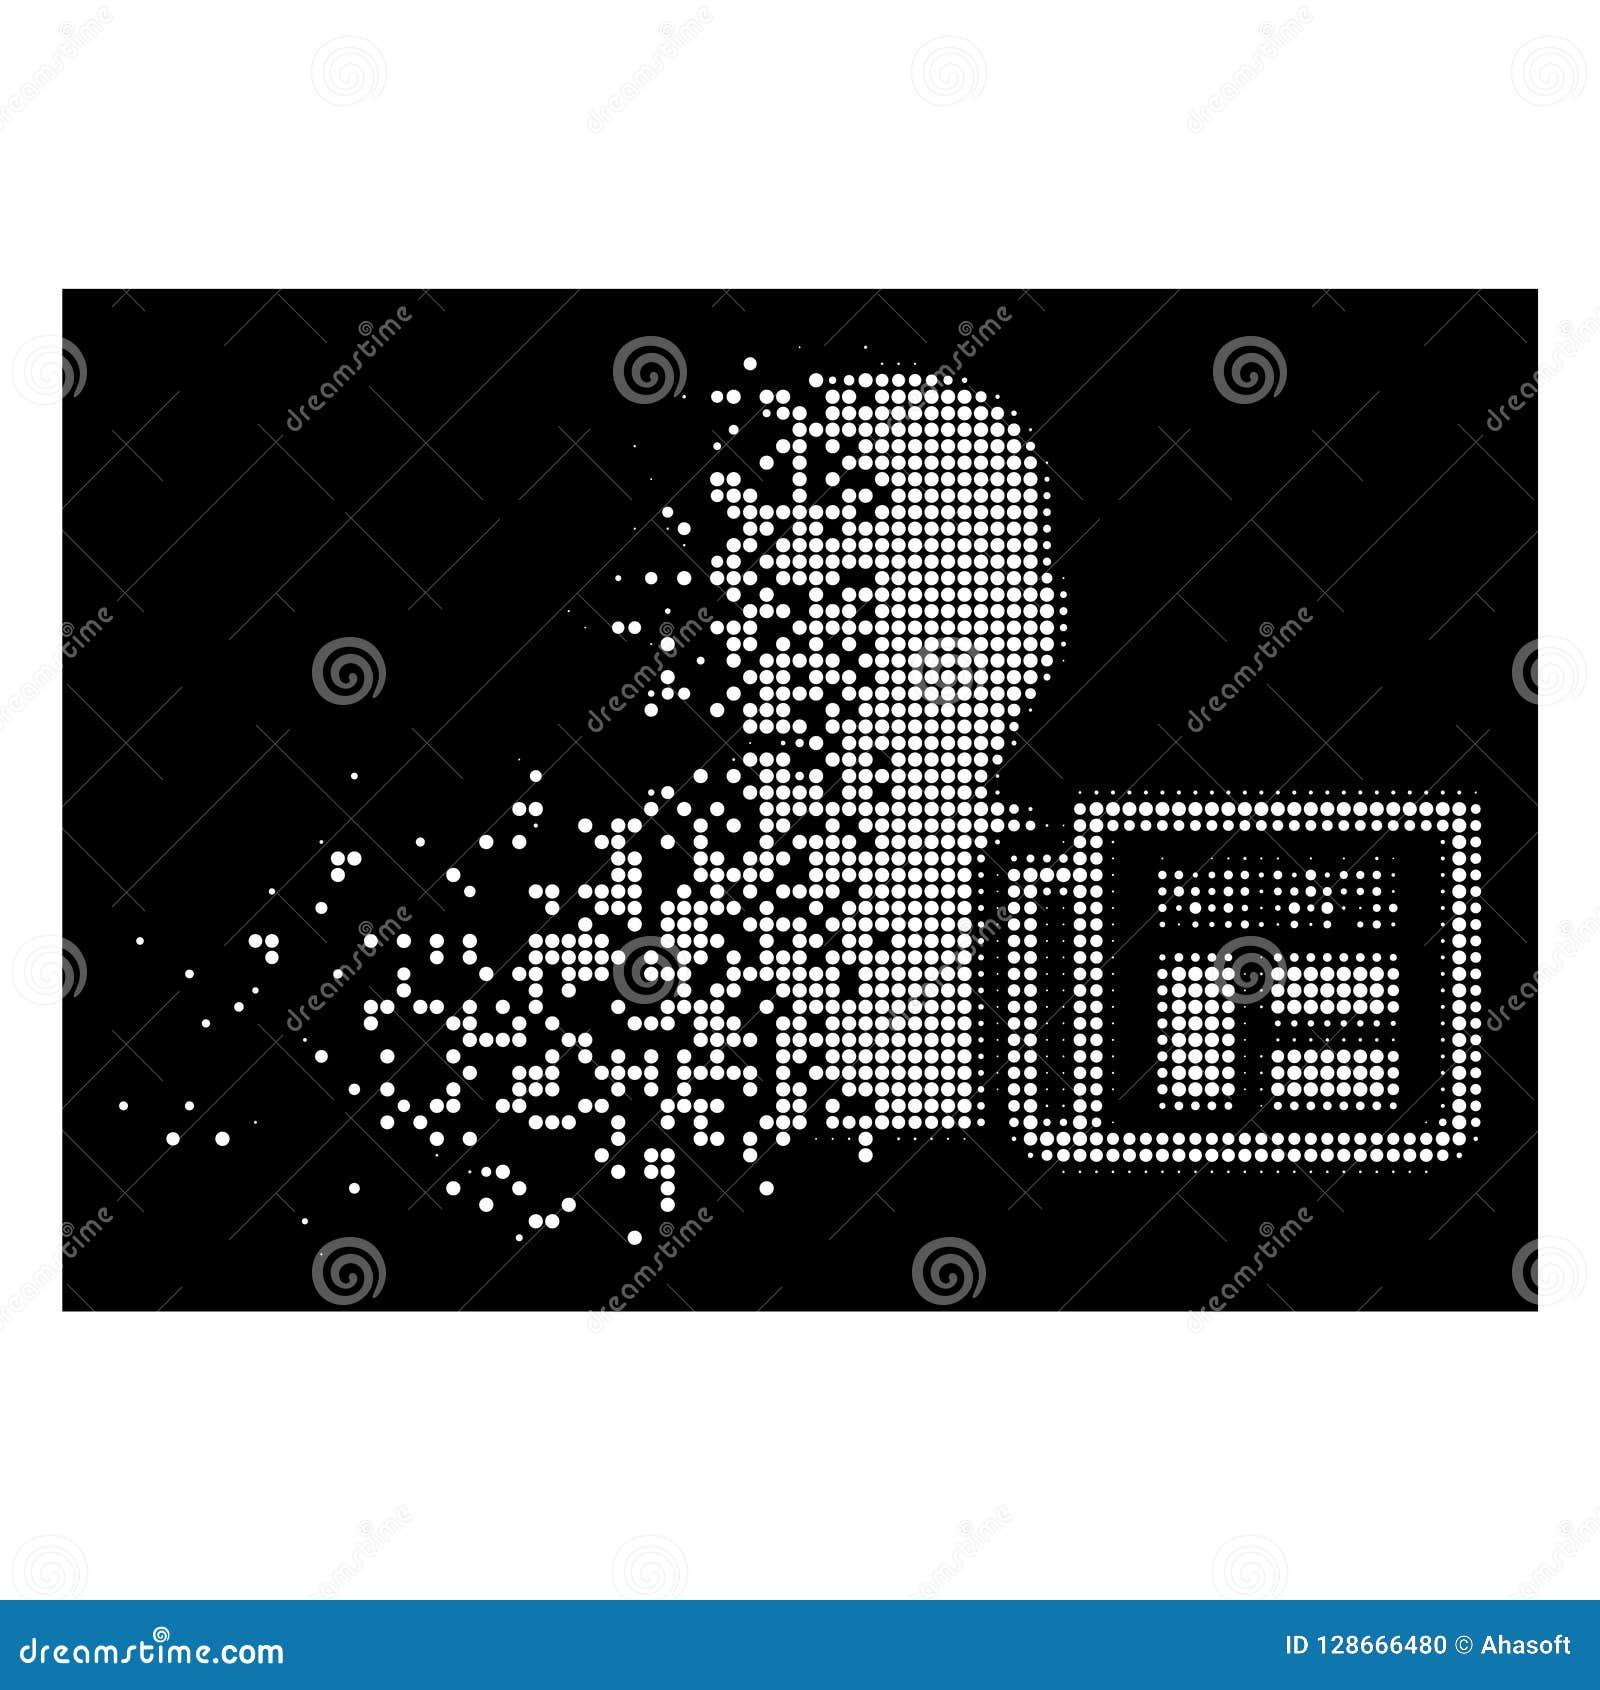 bright fractured pixelated halftone newsmaker newspaper icon